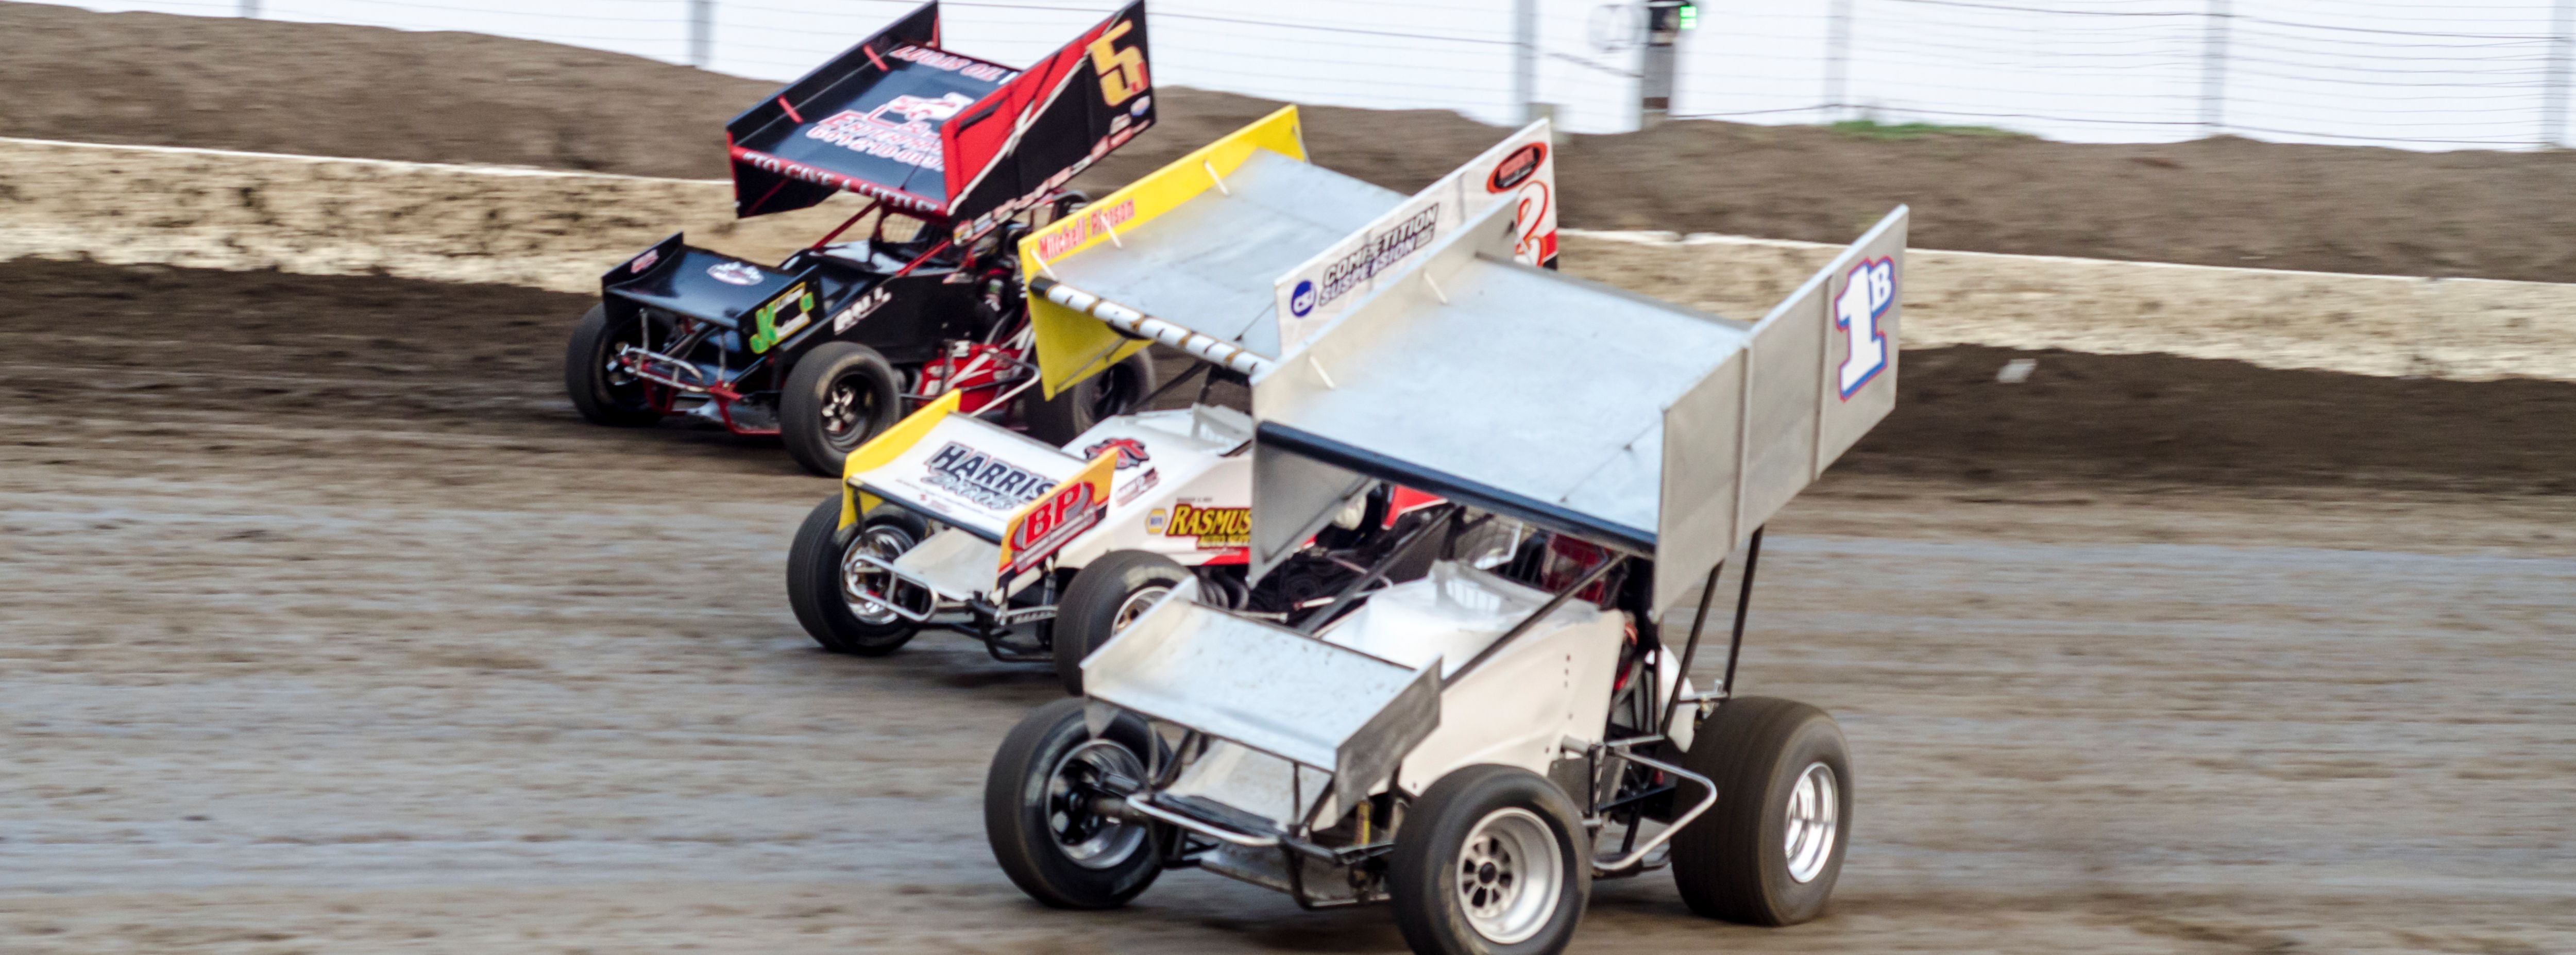 Casey's General Stores Fall Brawl